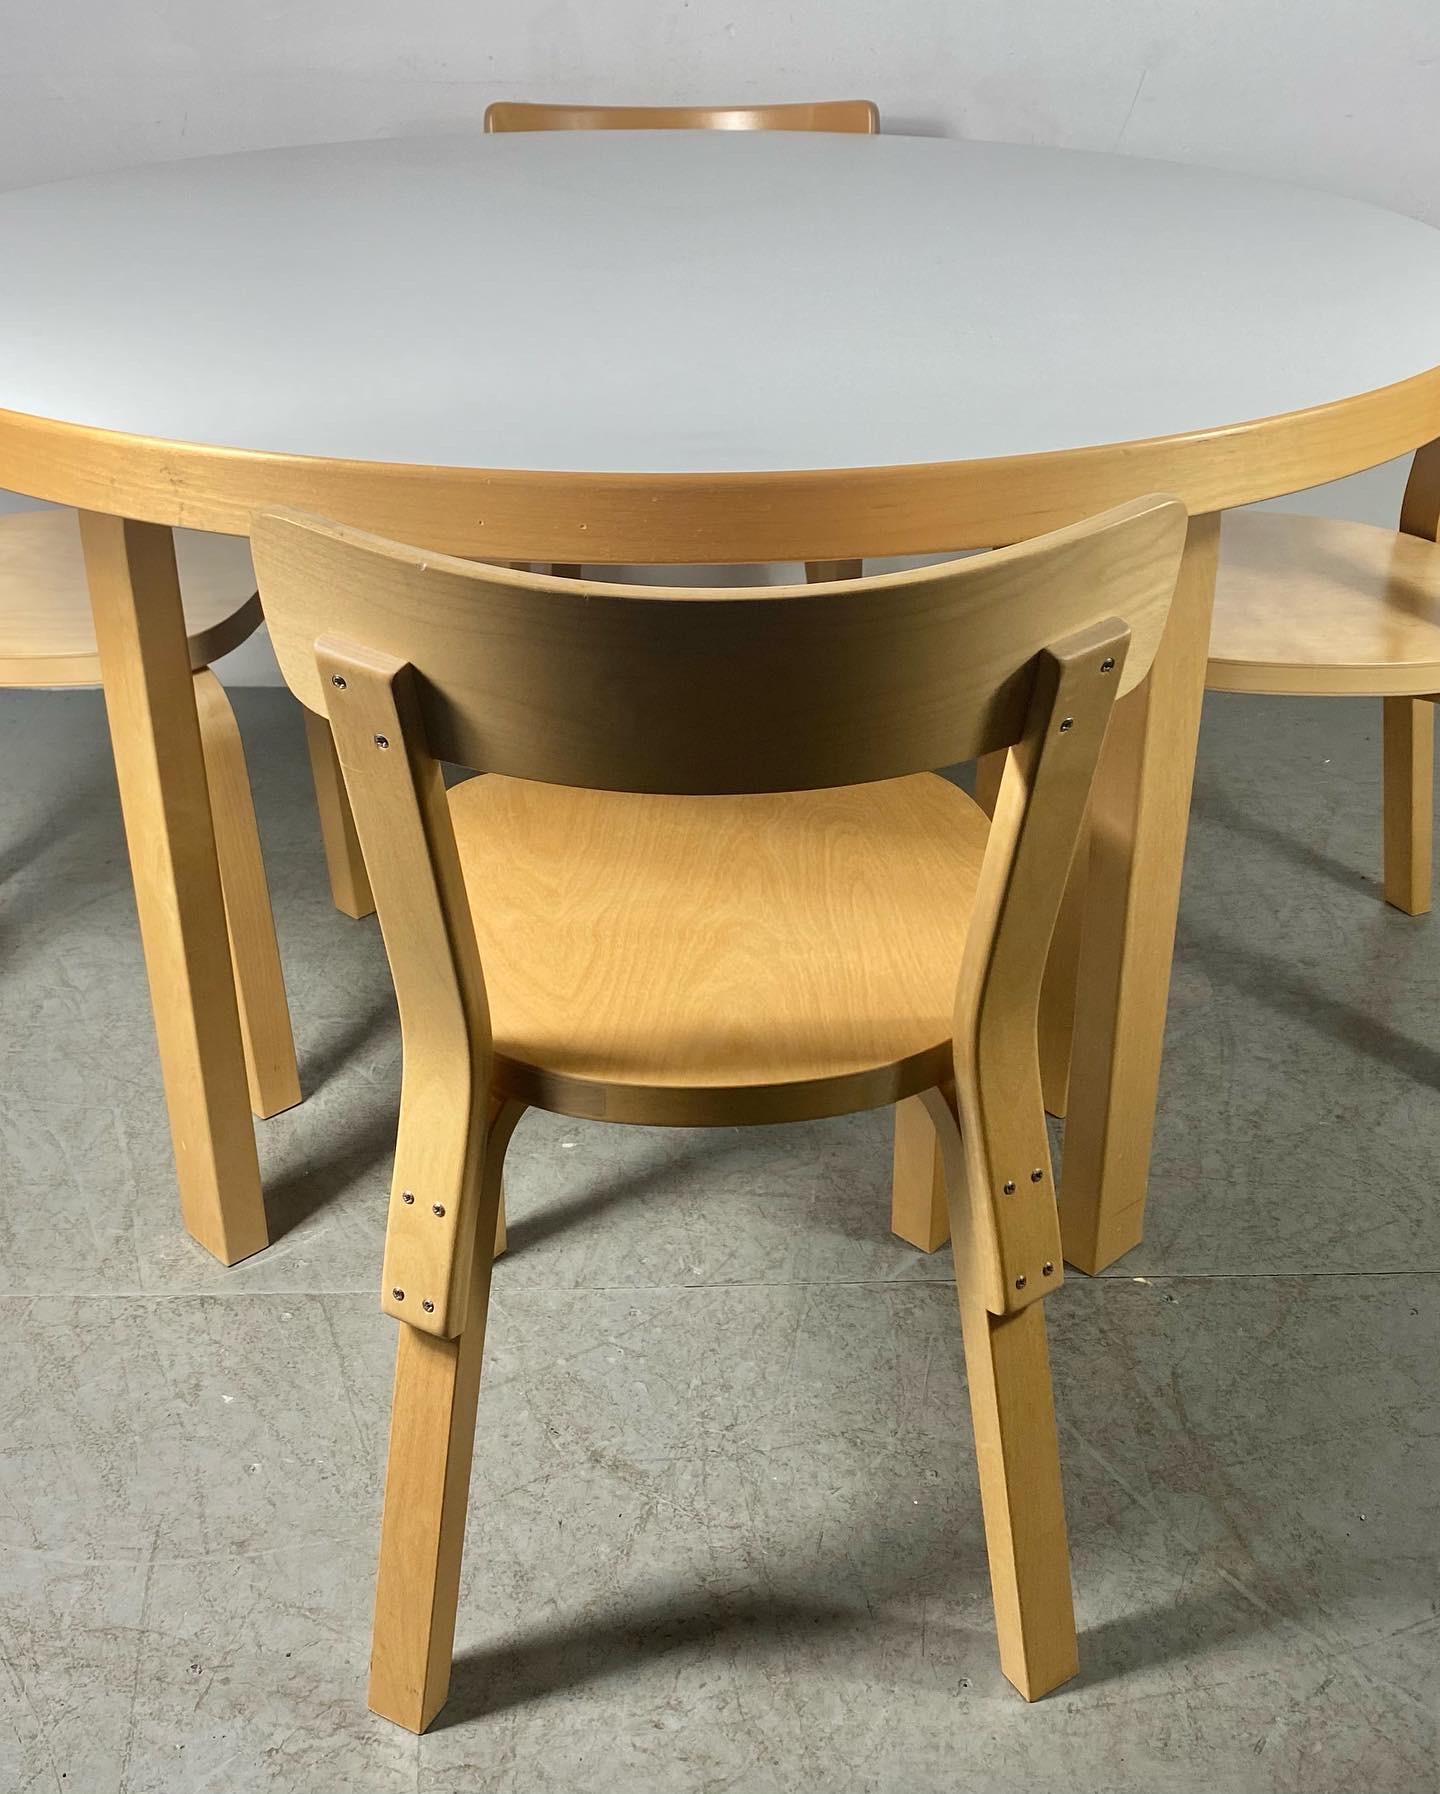 Classic Modernist Bent Plywood Burch Table and chair set by Alvar Aalto for Artek / Finland,, Great set,, gently used condition.Table measures 49